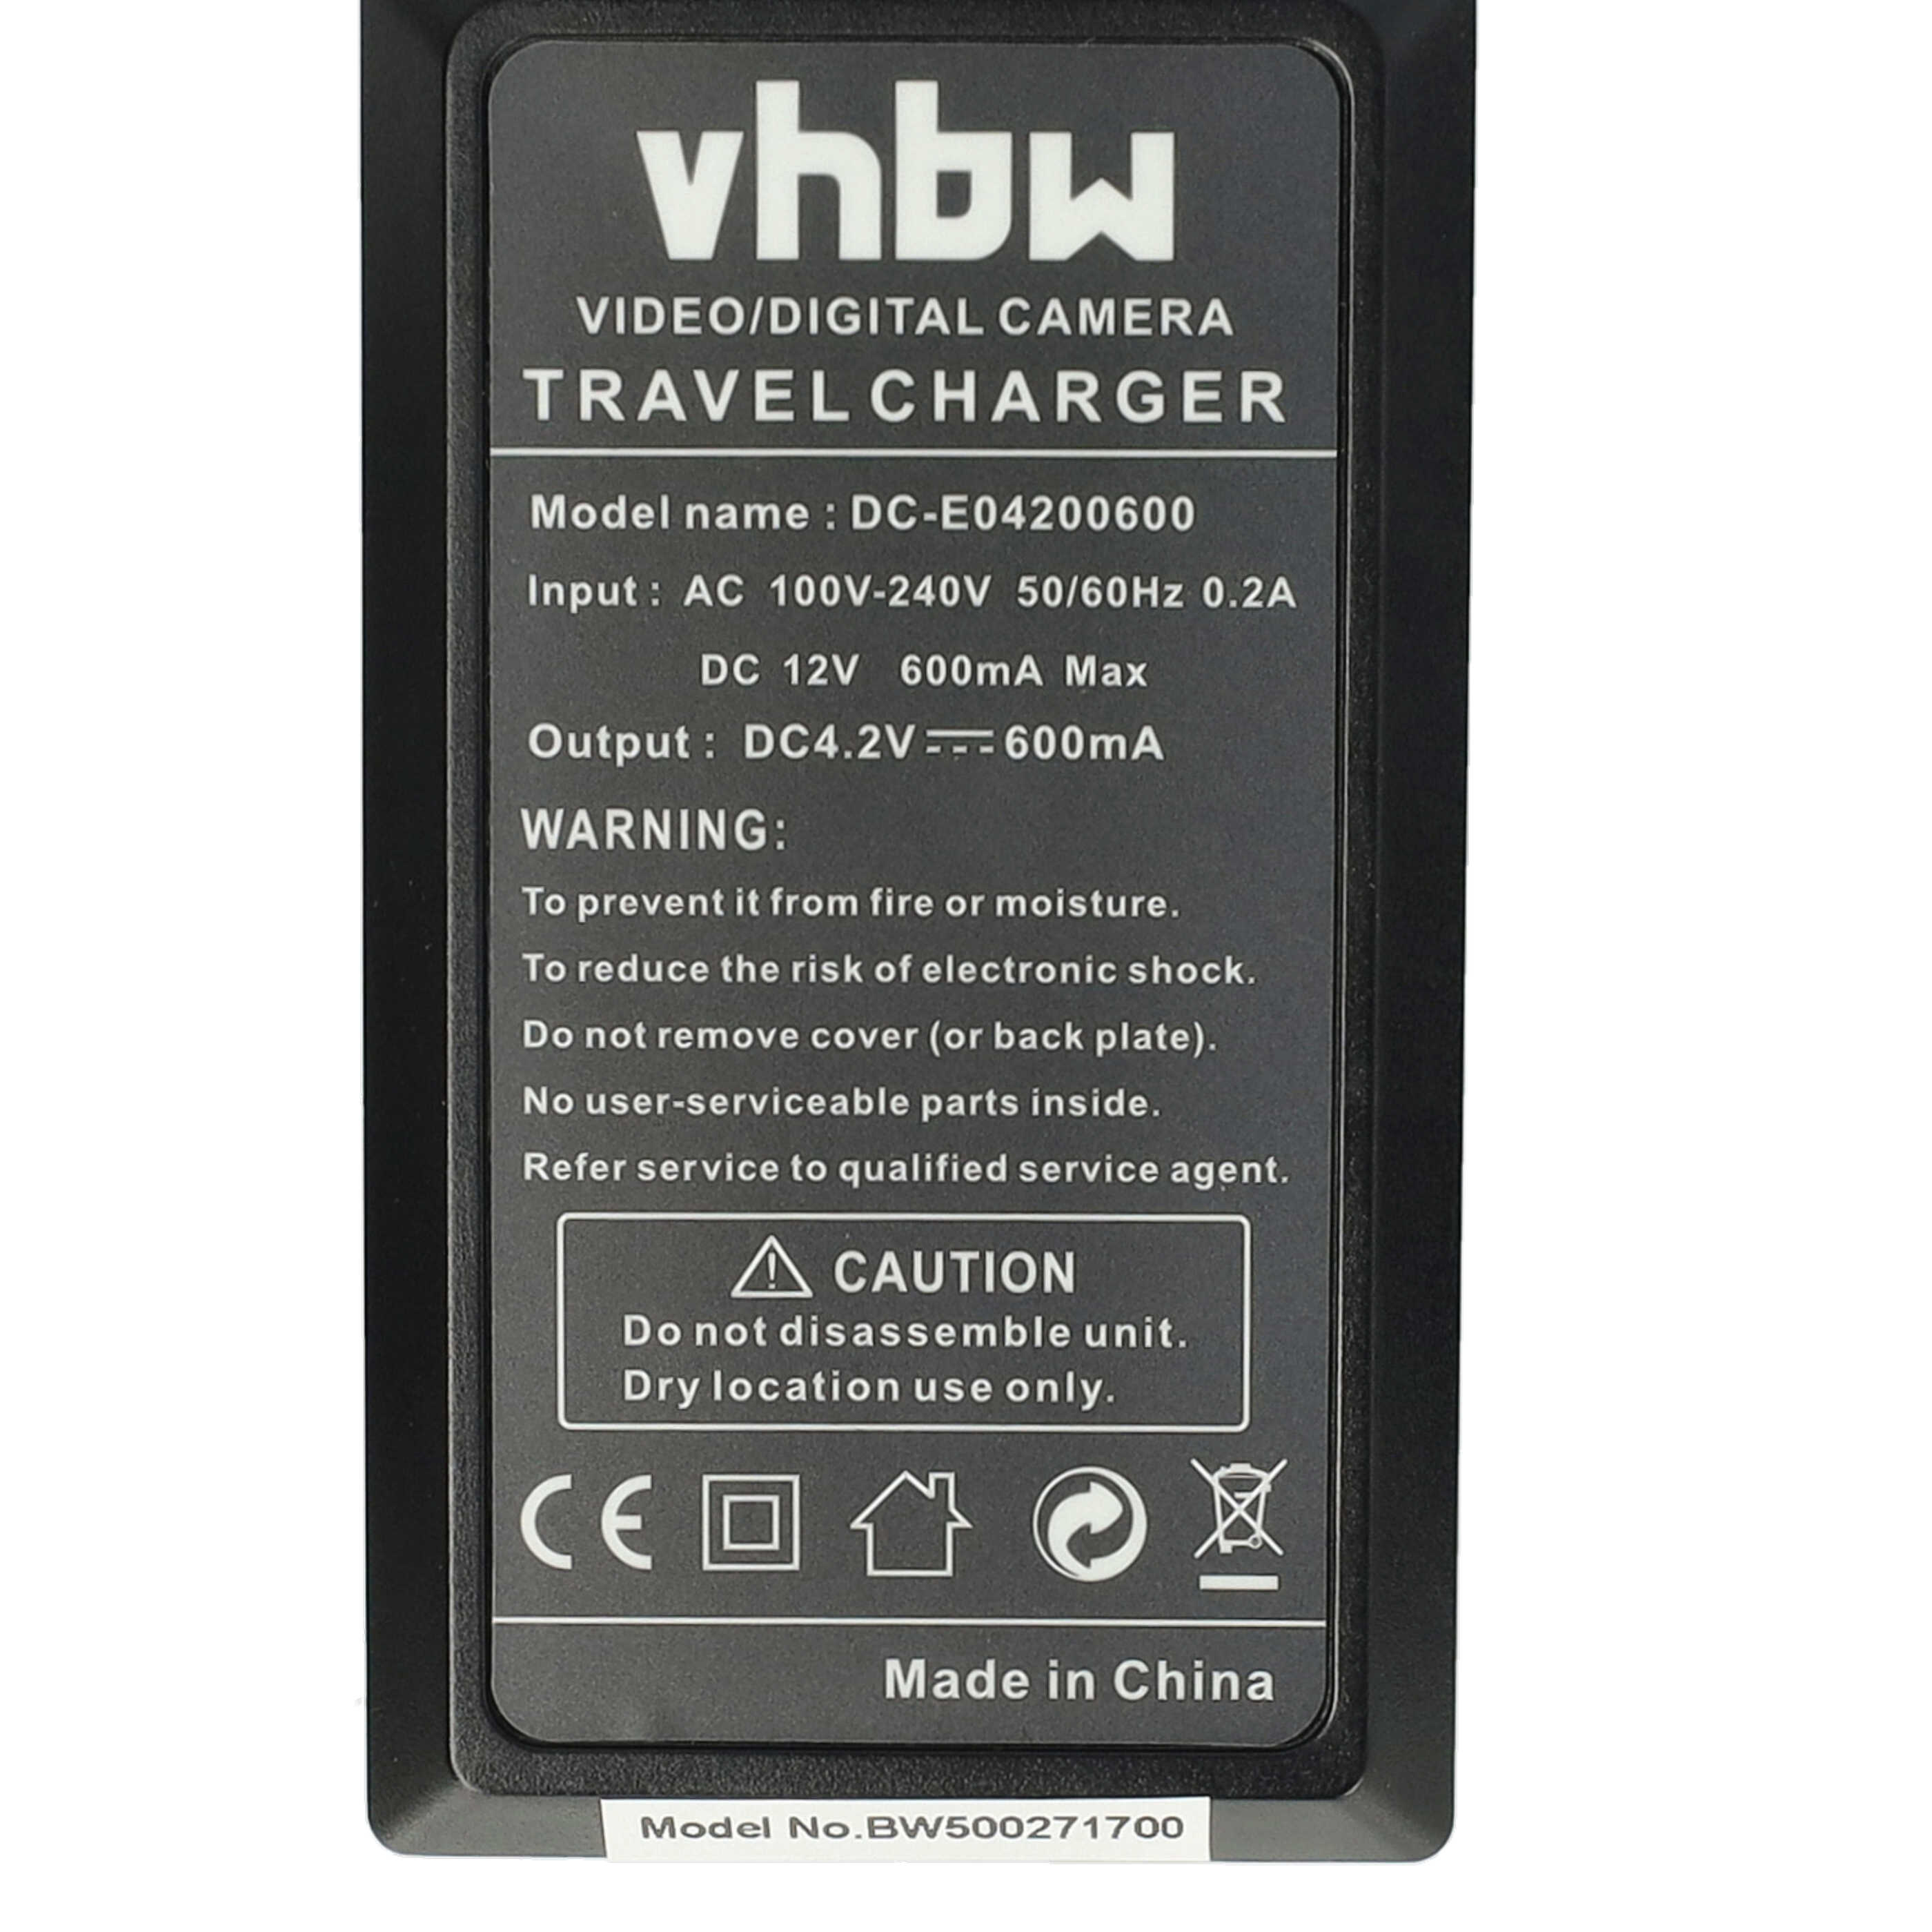 Battery Charger suitable for Creative Vado HD Pocket Video Cam Camera - 0.6 A, 4.2 V